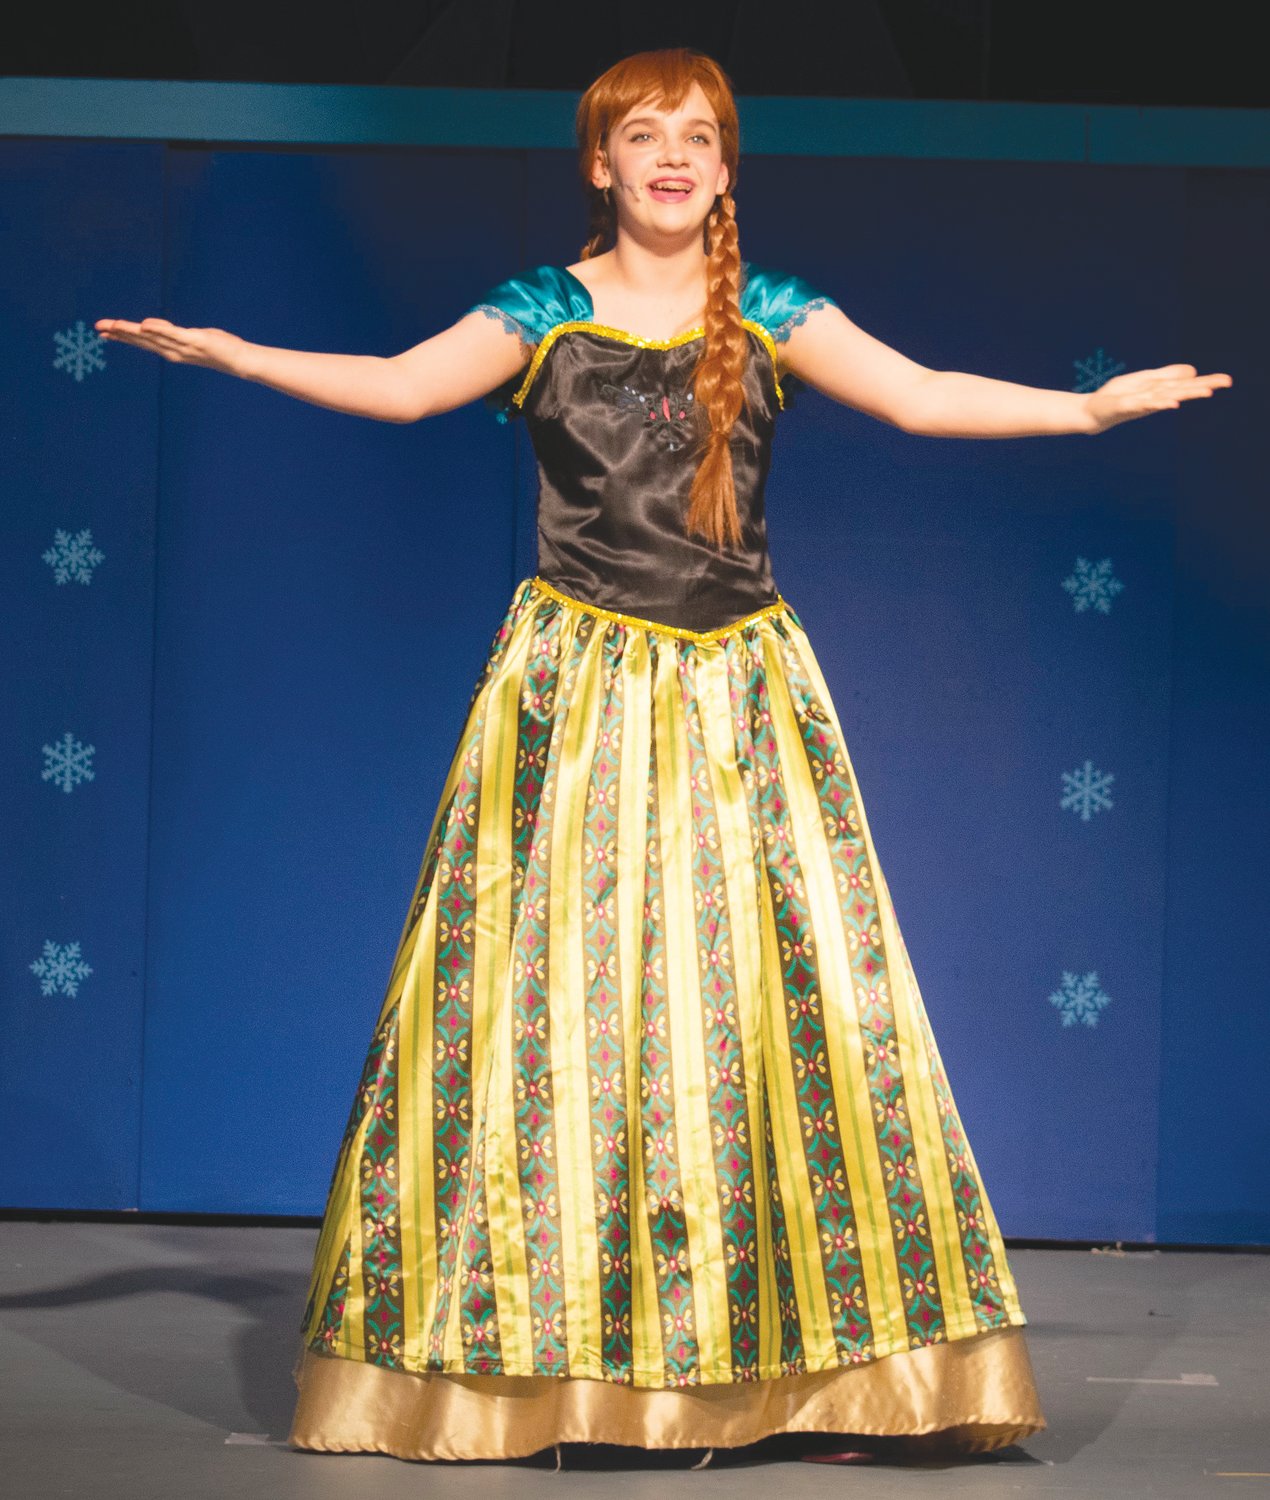 Noelle Froer performs as Princess Anna.